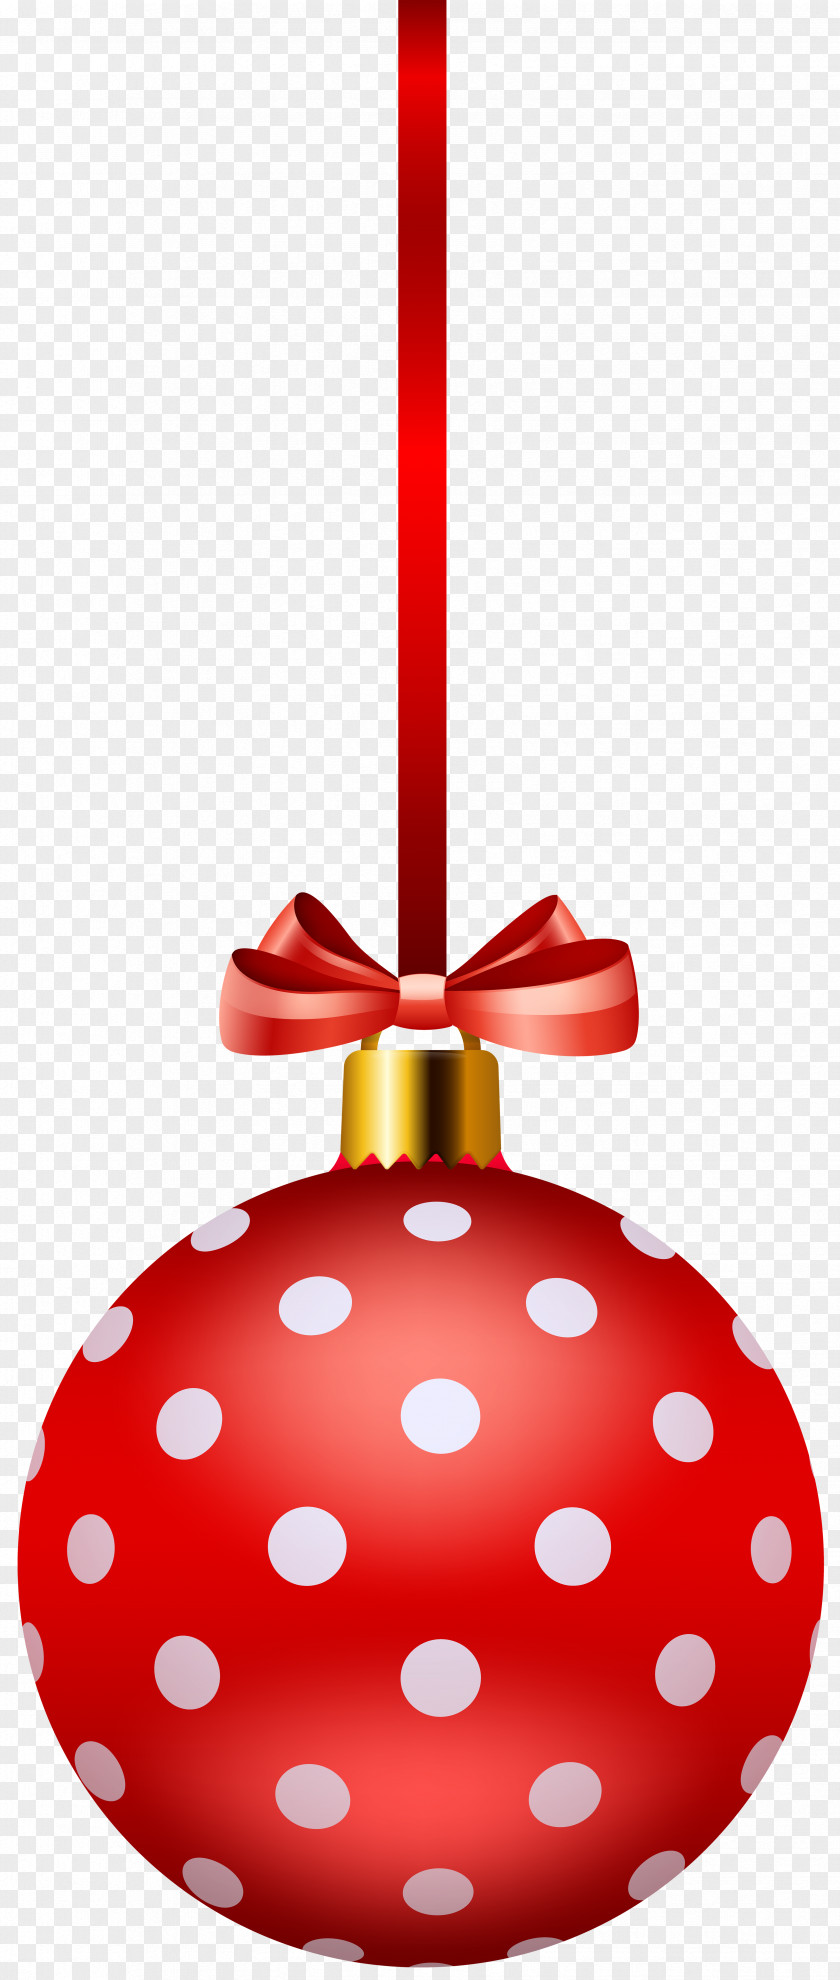 Red Christmas Ball Transparent Clip Art Image File Formats Lossless Compression PNG